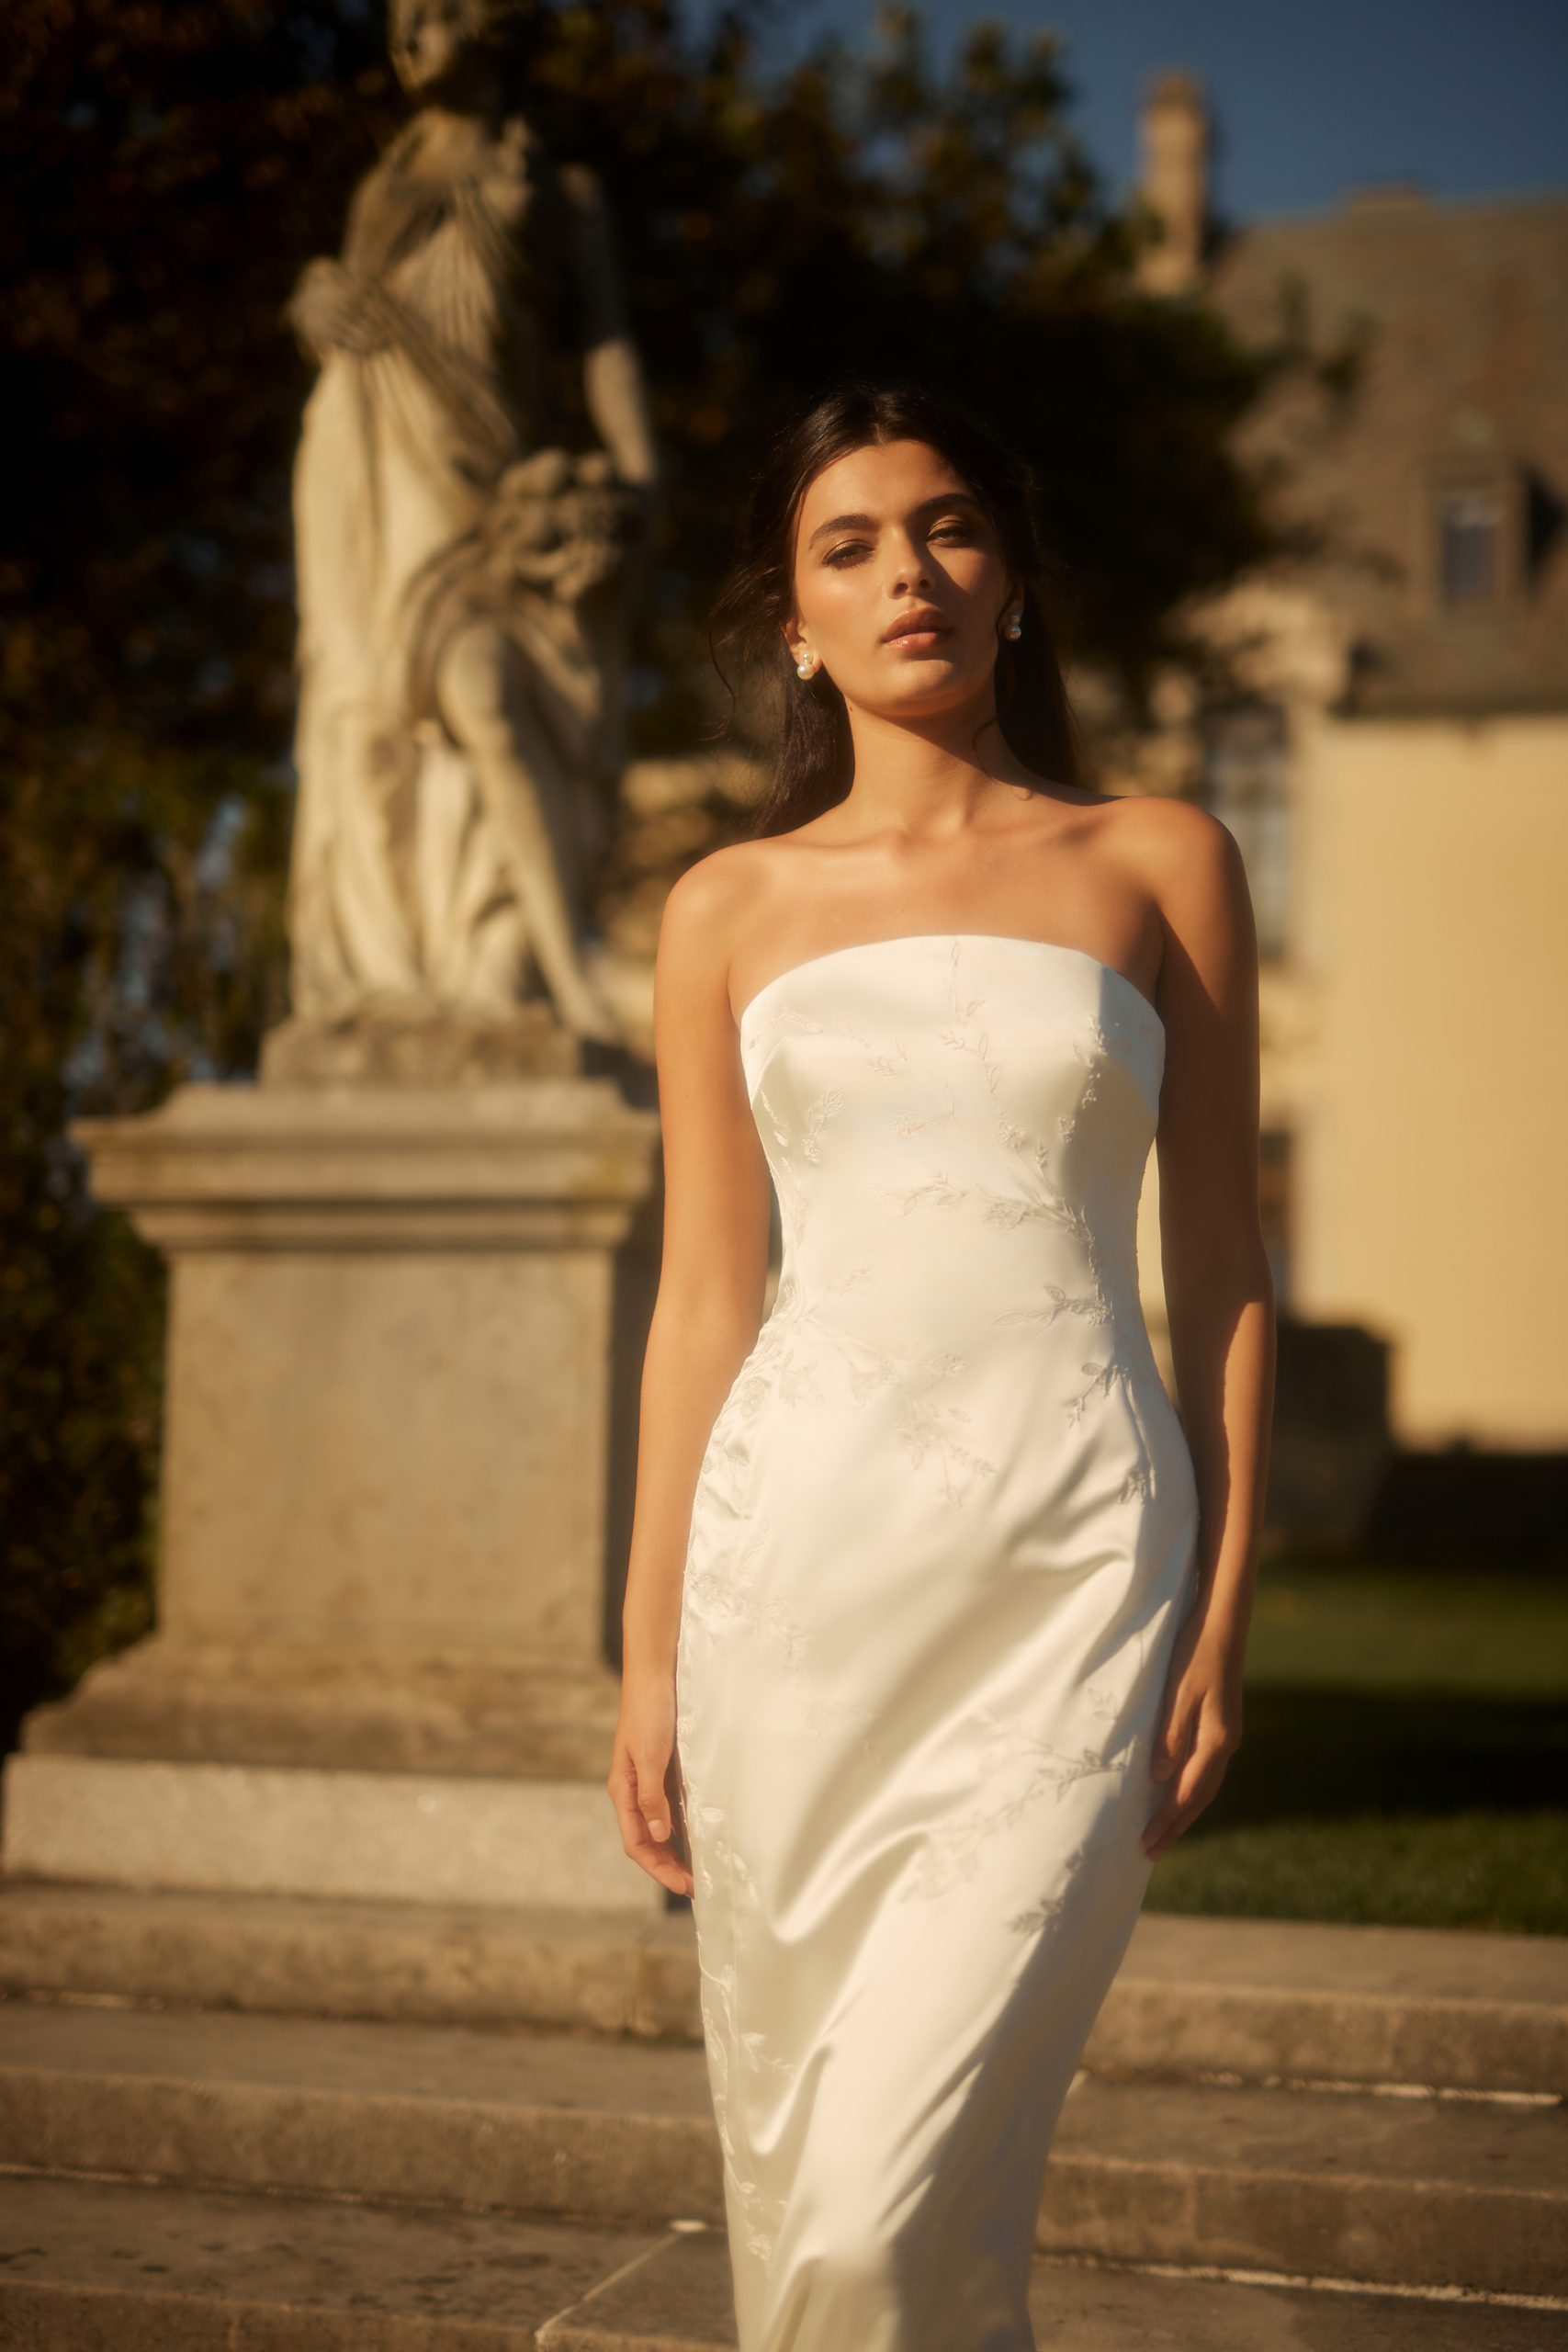 Embroidered Satin Sheath Gown With Detachable Overskirt by Enaura Bridal - Image 1